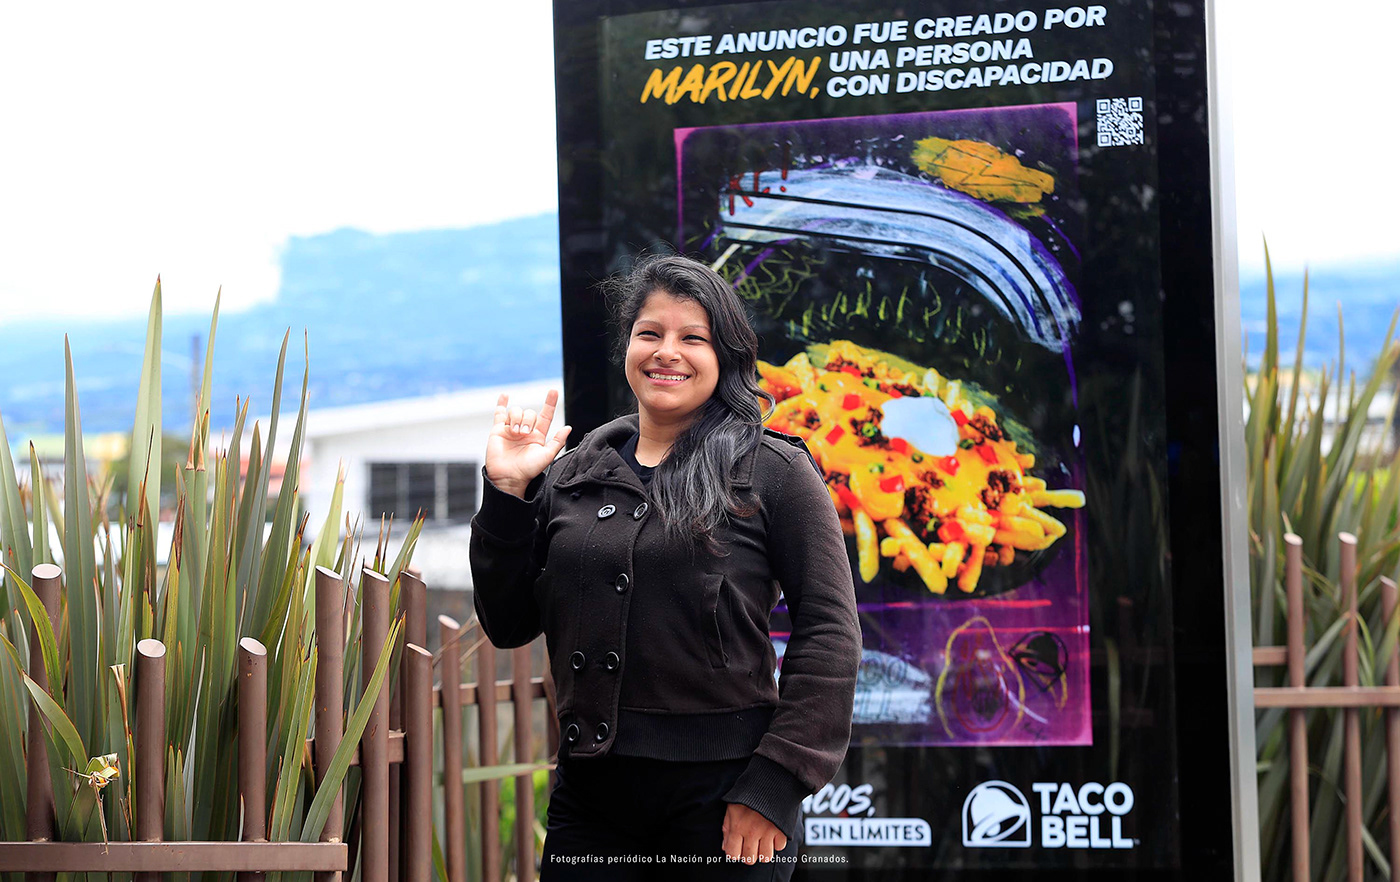 Accessibility campaign disability Diversity equality inclusion Taco Bell taco restaurant Fast food